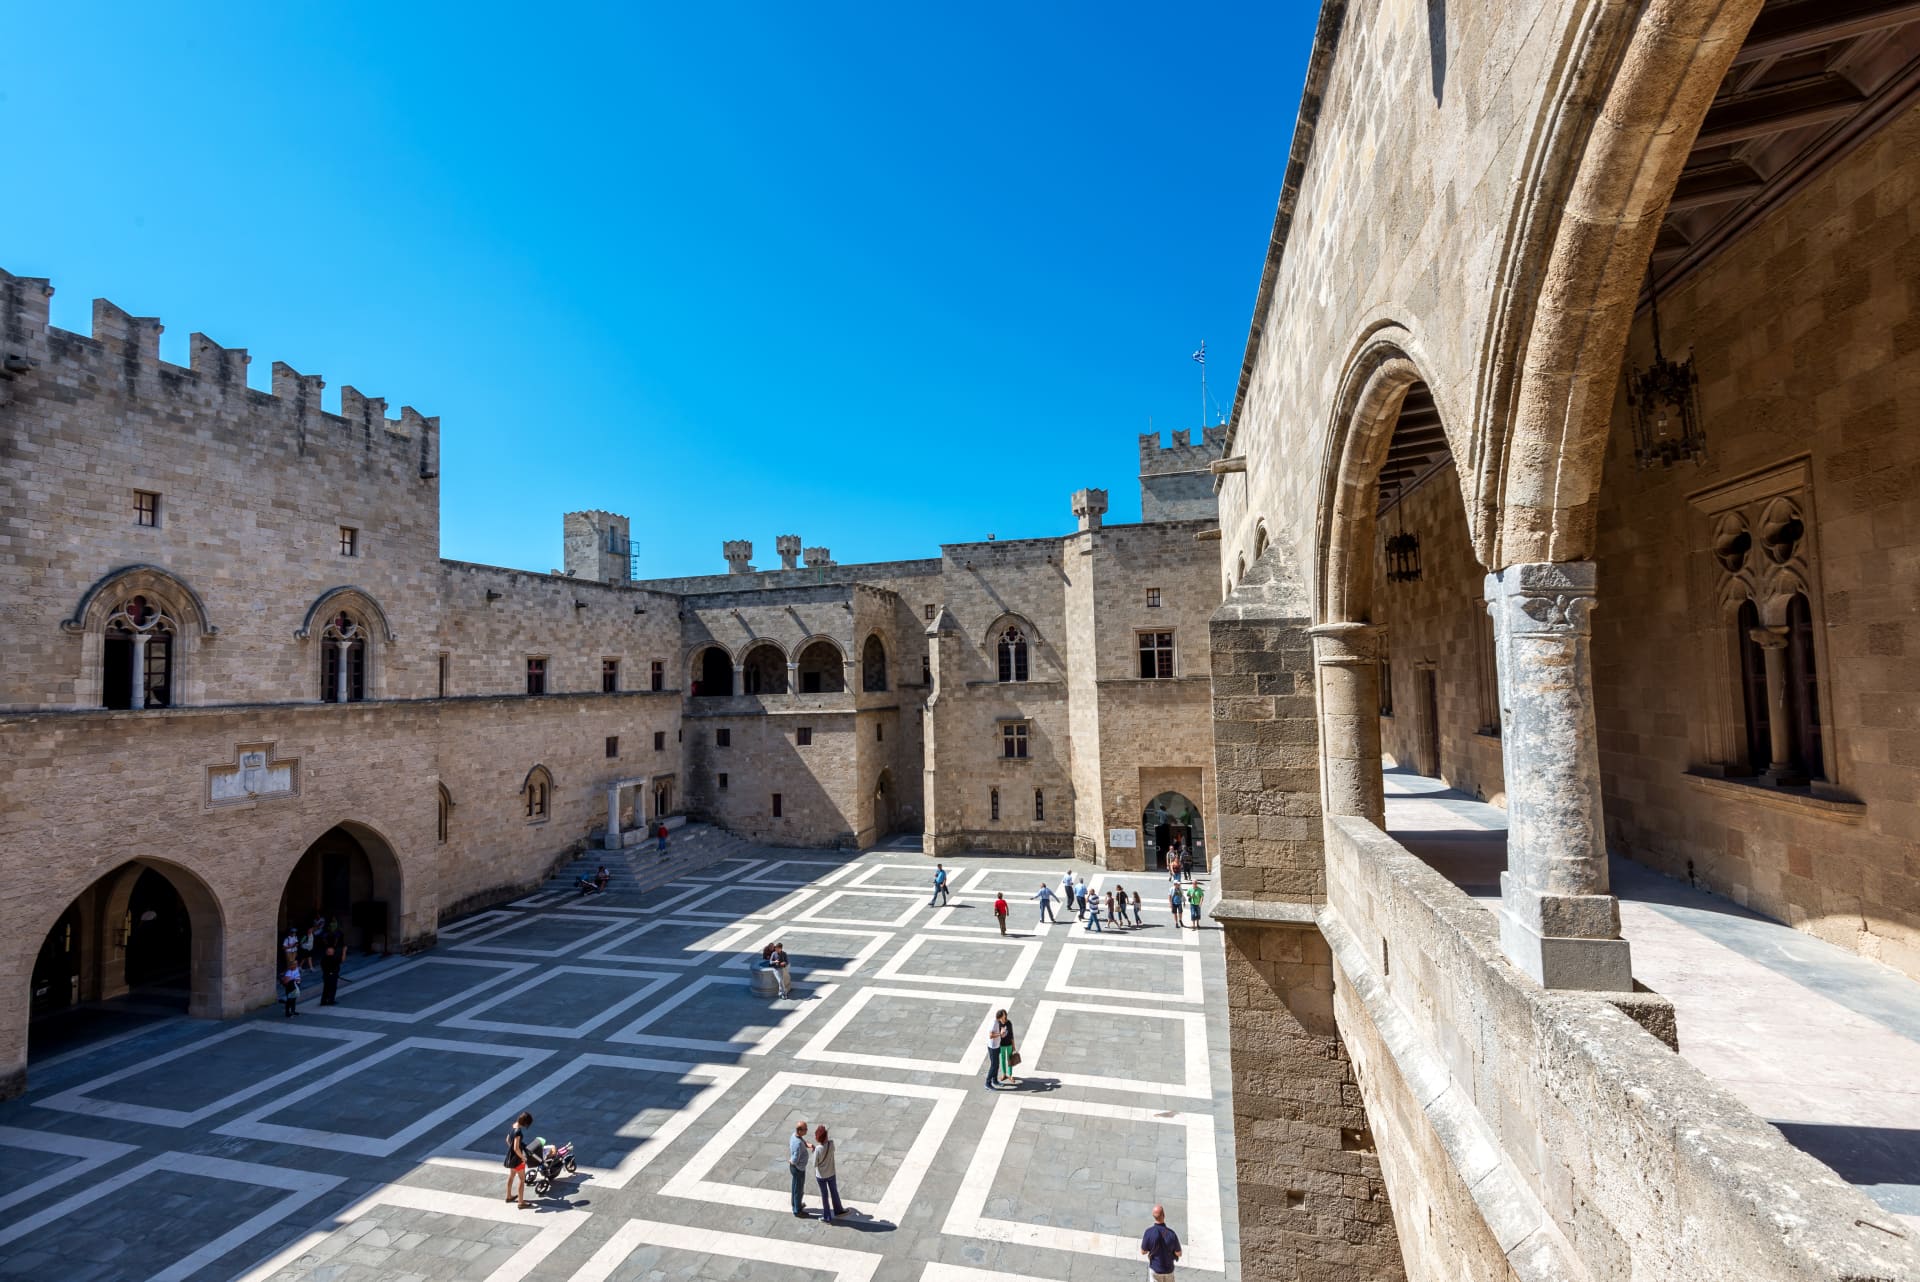 Grand Master Palace Rhodes- The Knights of Rhodes' Kastello